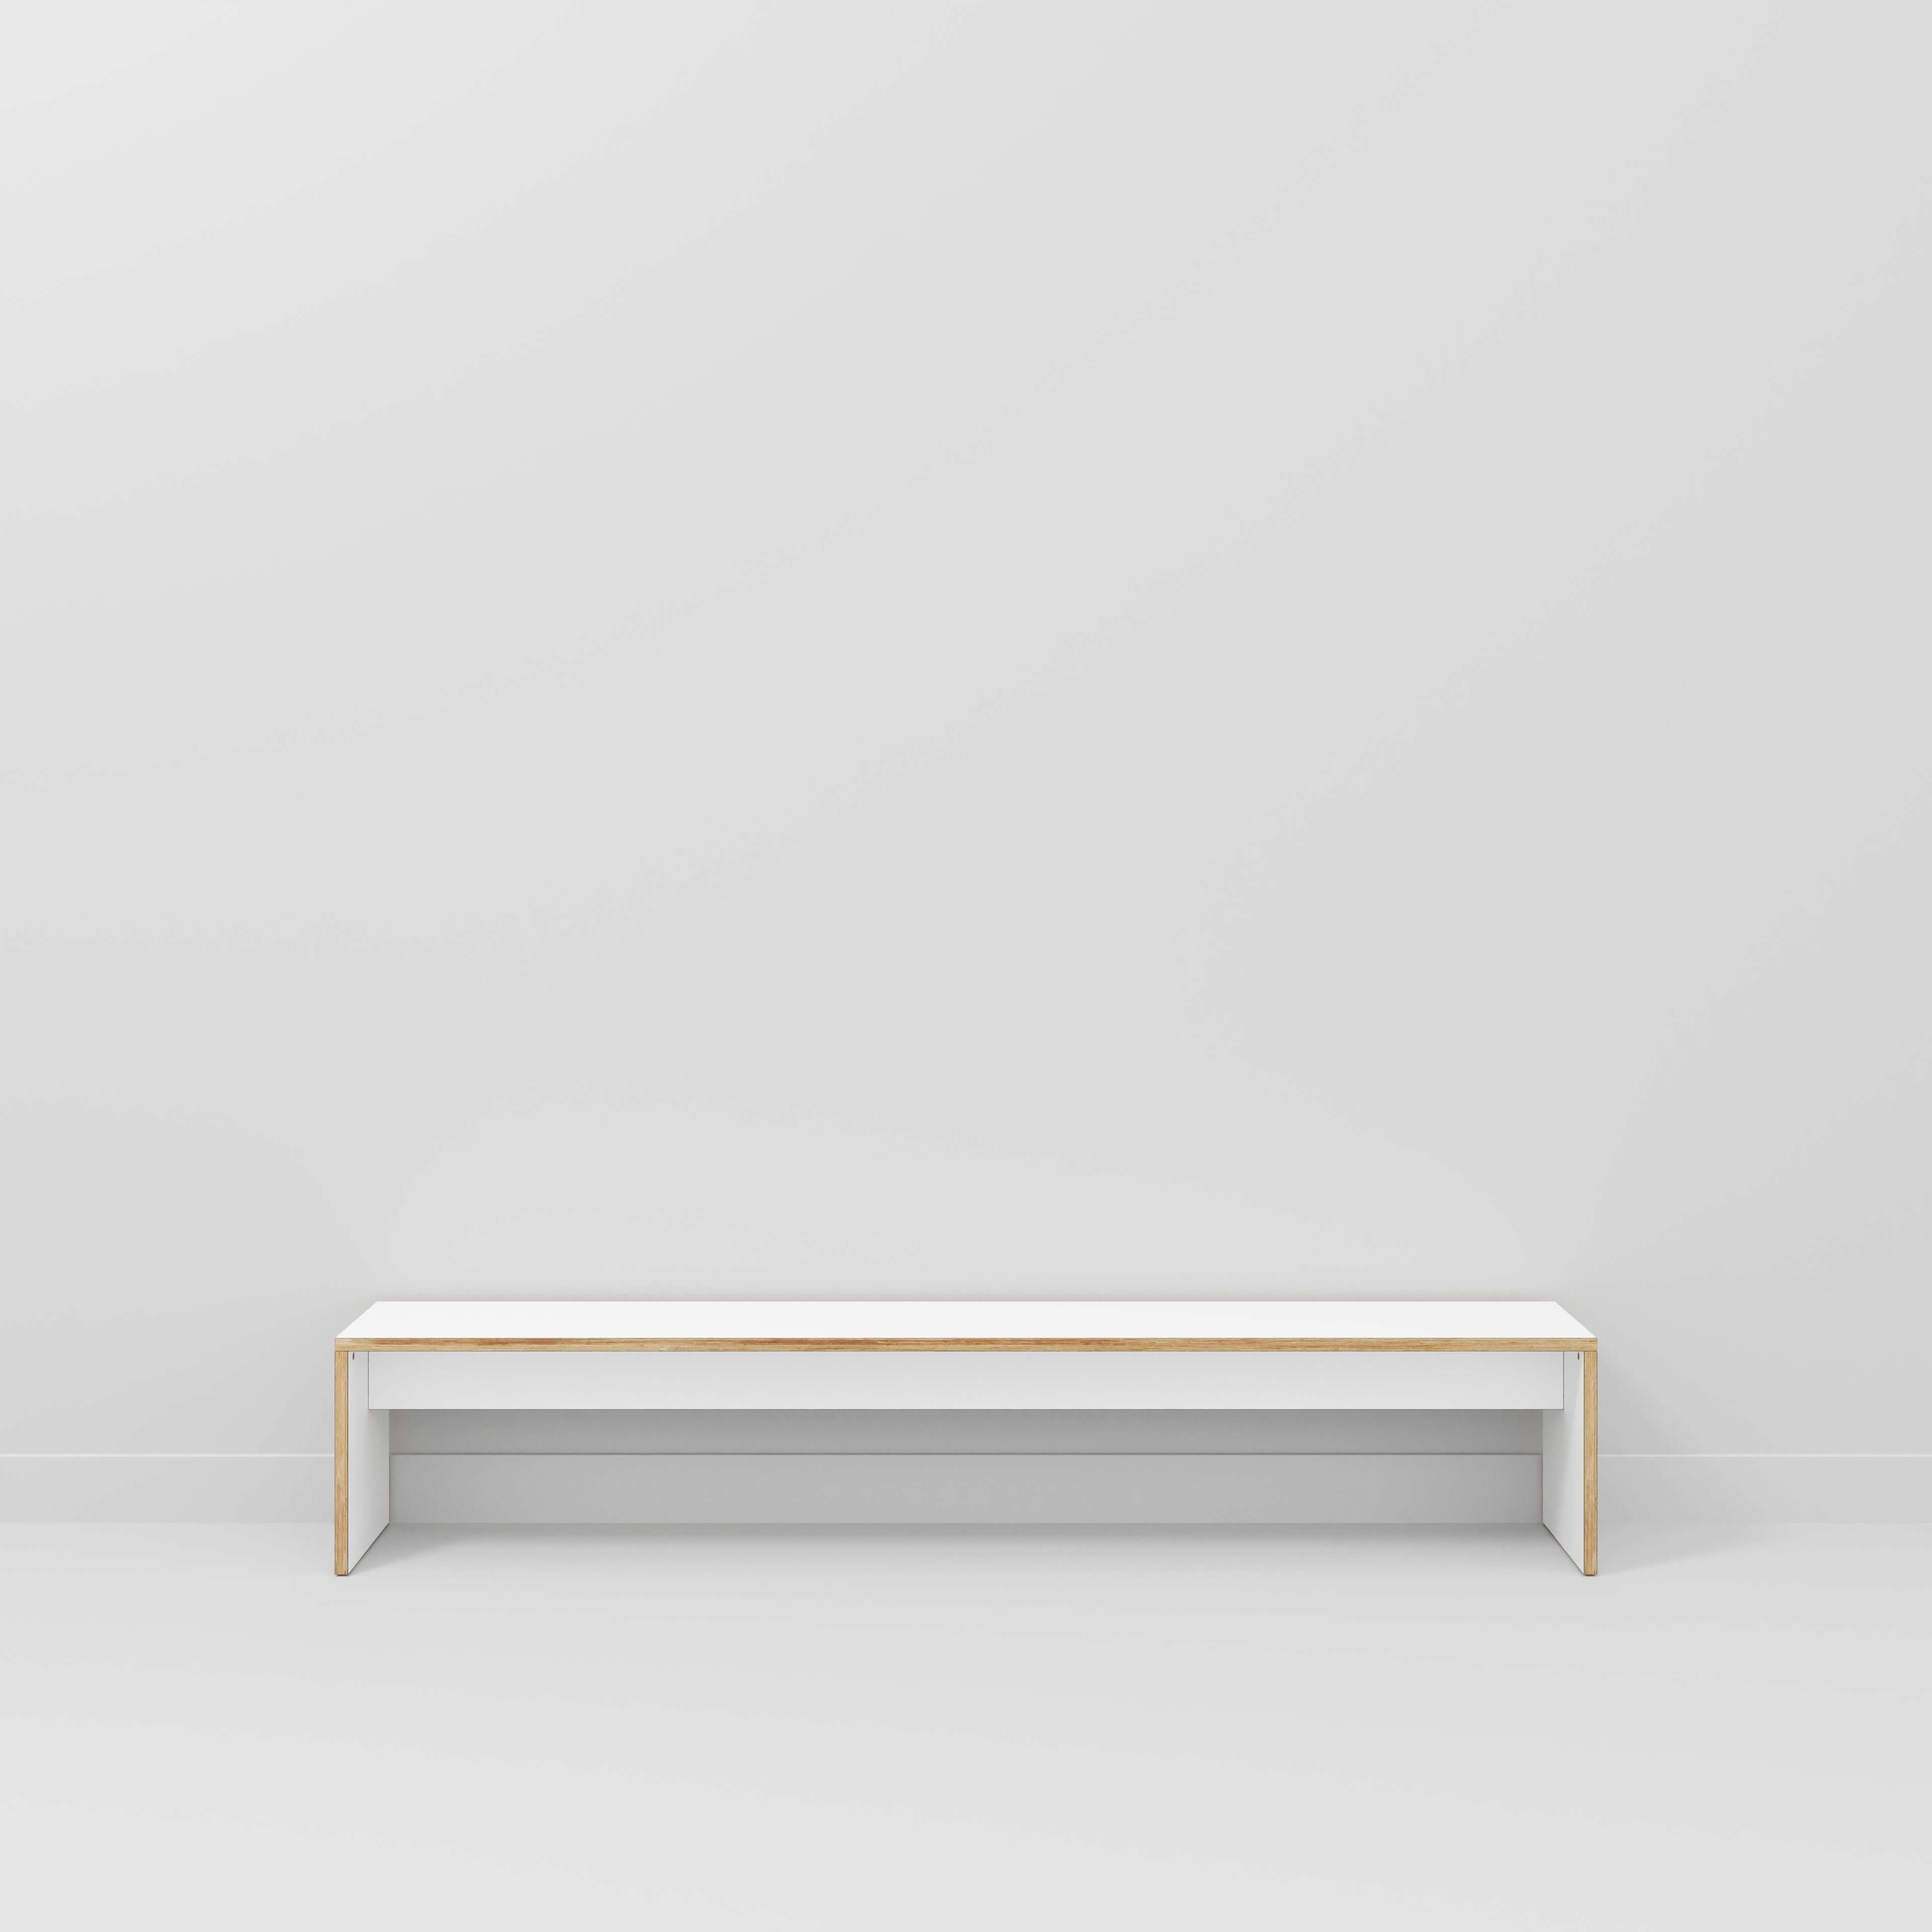 Bench Seat with Solid Sides - Formica White - 2400(w) x 400(d)